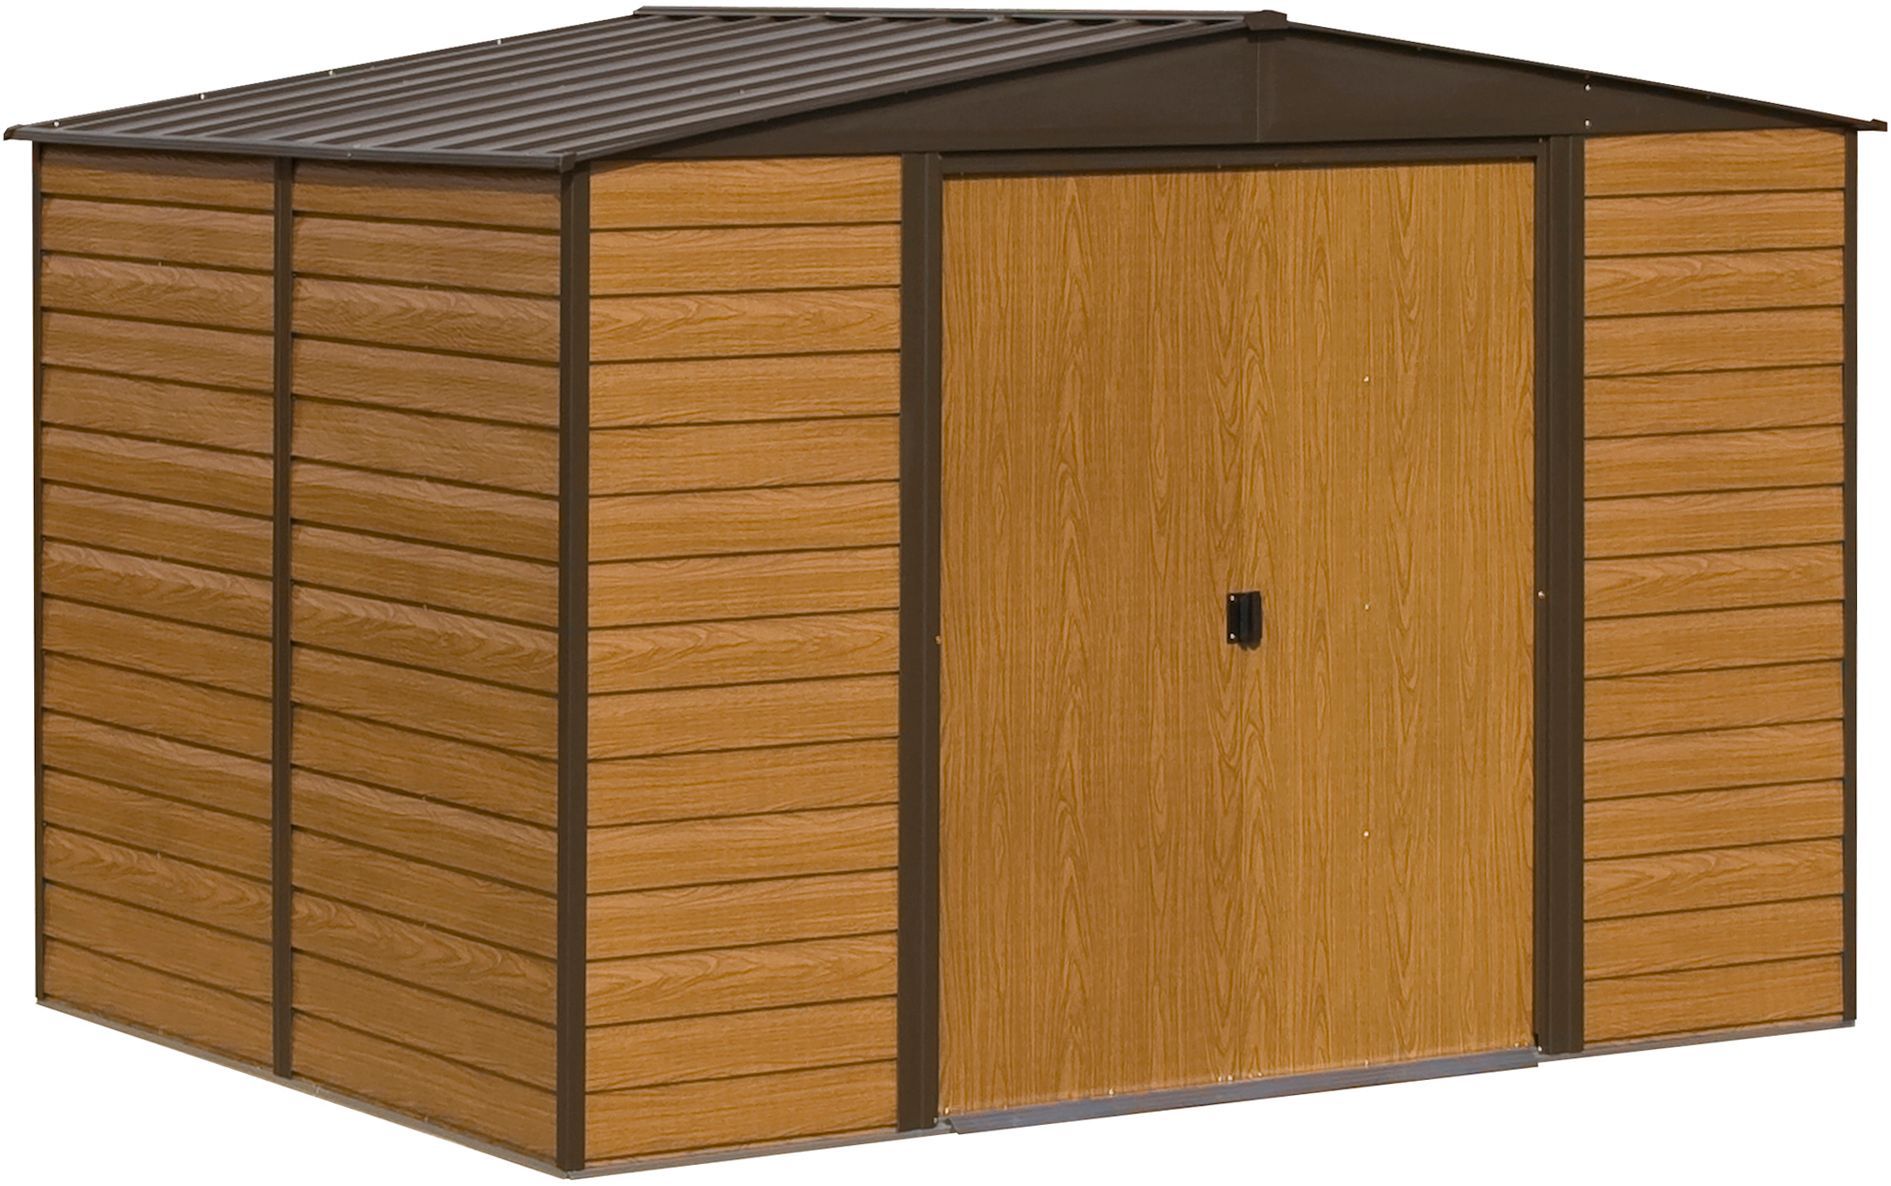 Arrow Woodvale 10x8 Apex Metal Shed - Assembly service included